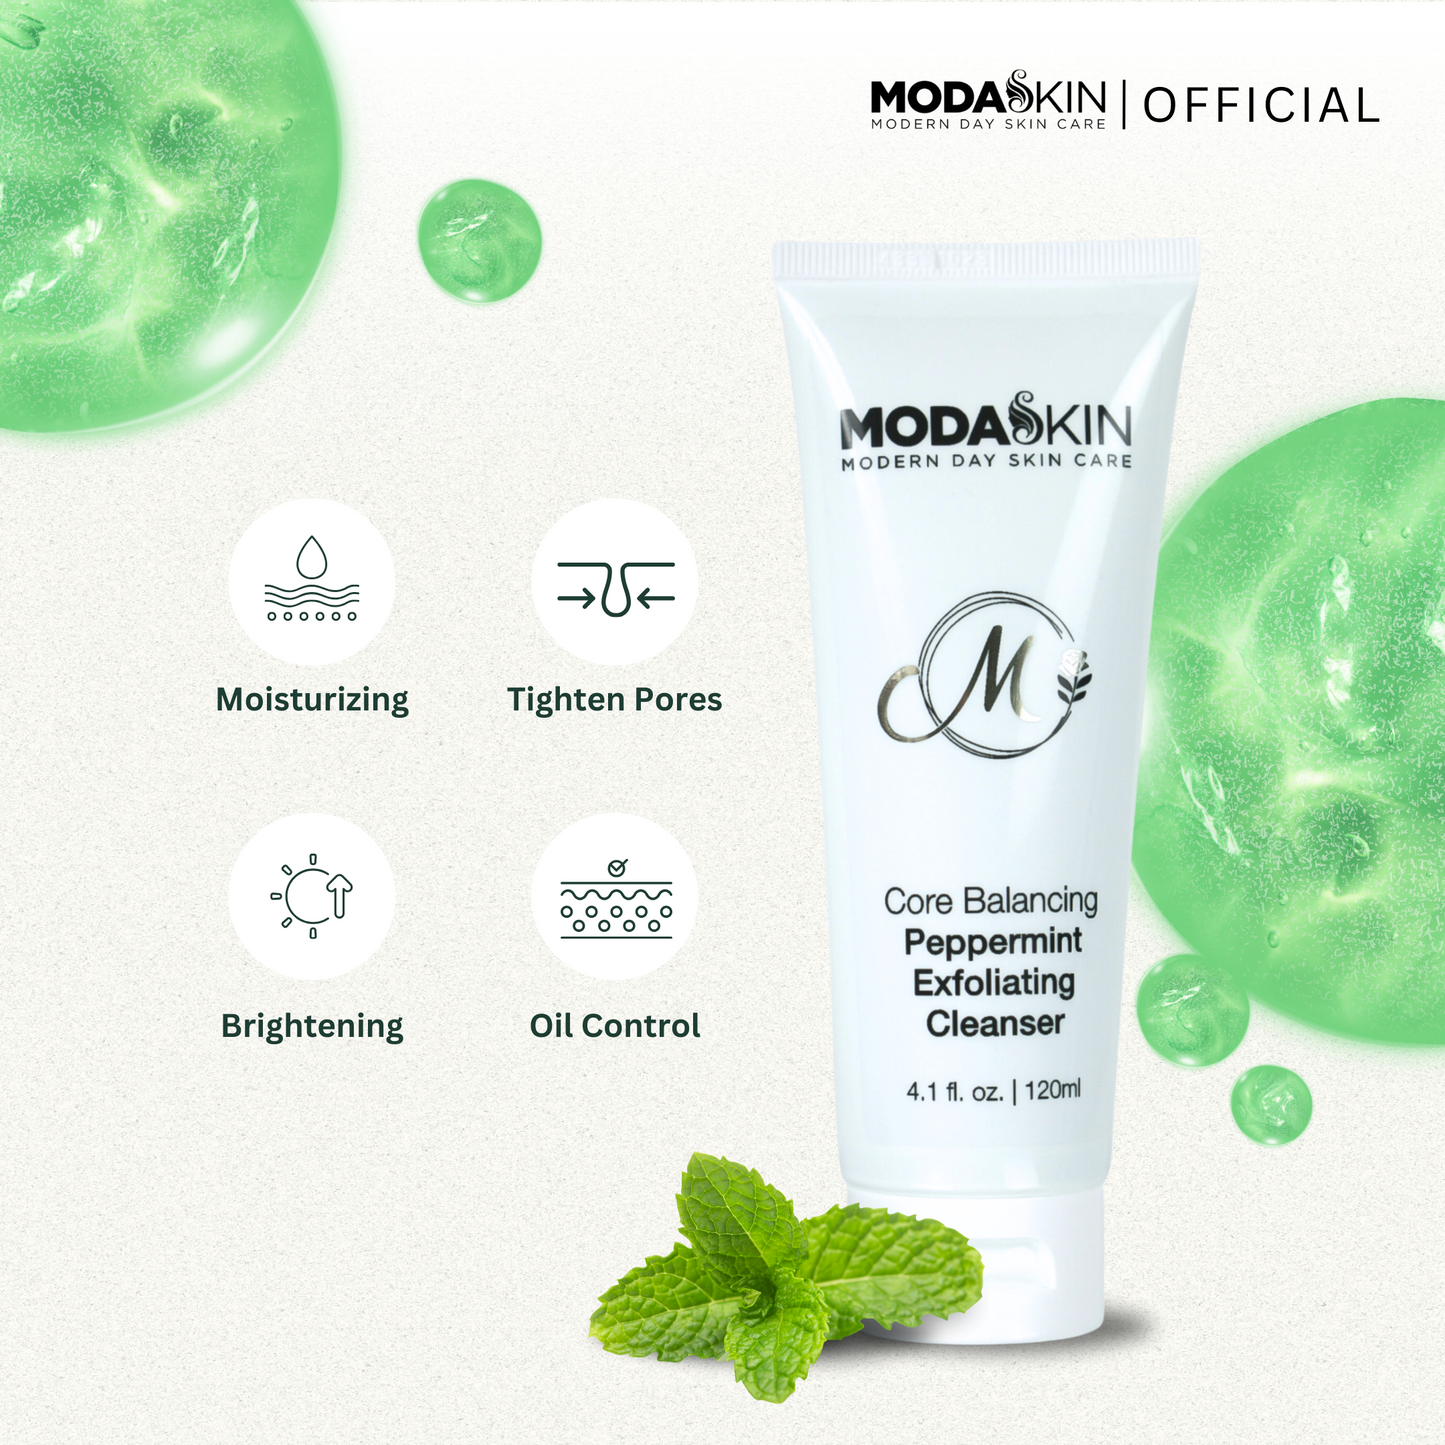 Core Balancing Peppermint Exfoliating Cleanser